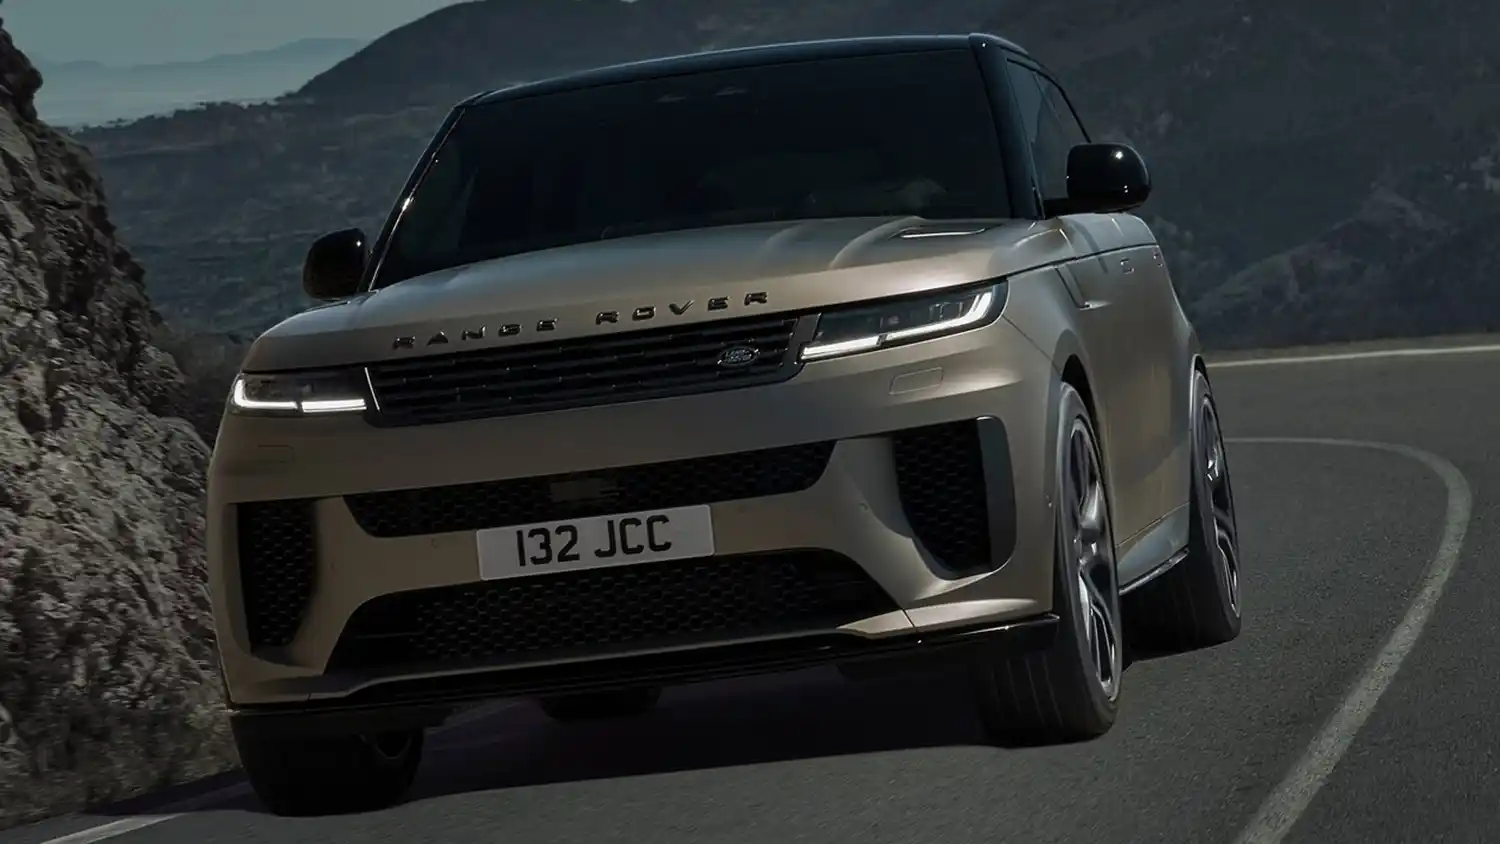 Range Rover Hybrid The Sophisticated Transport Of Choice For The